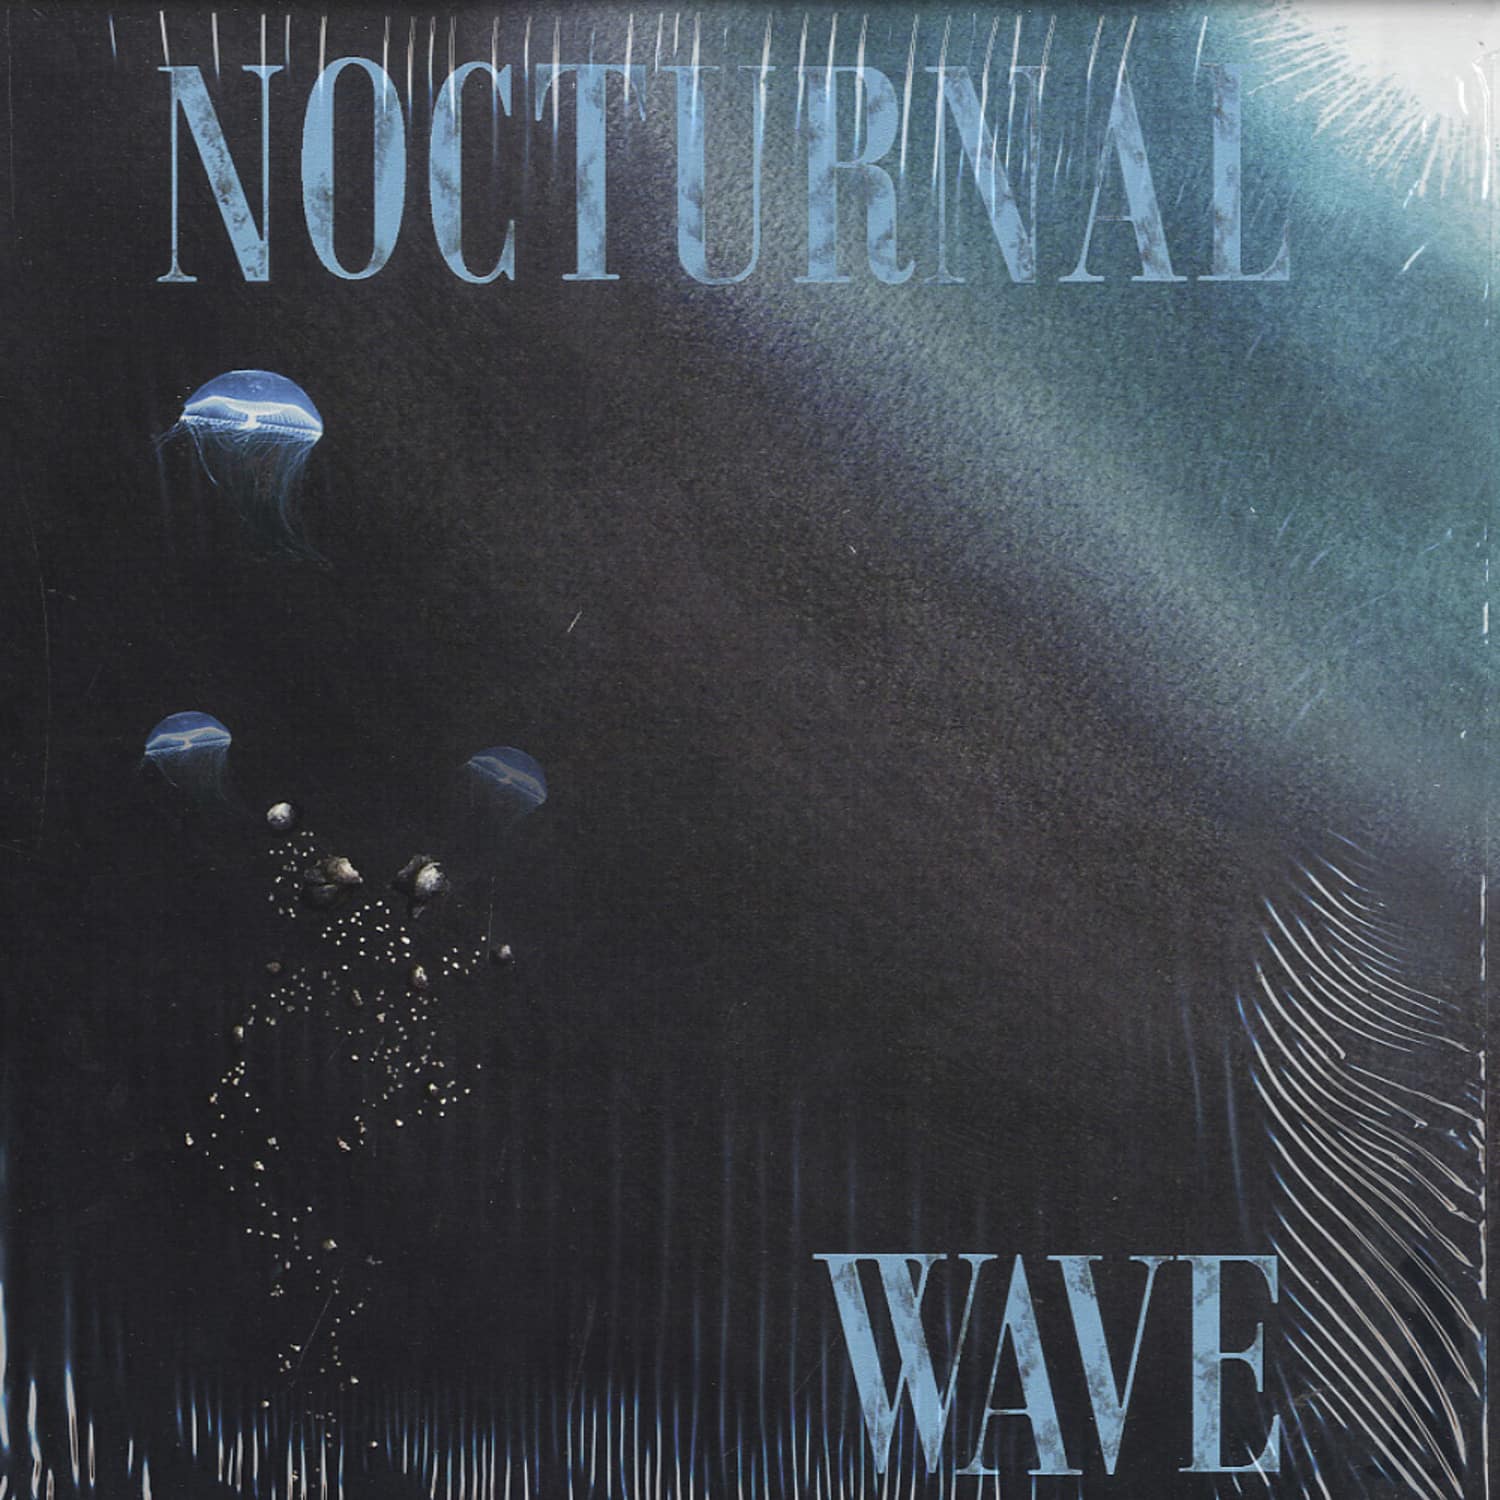 Acquiescence / Fake Left - NOCTURNAL WAVE